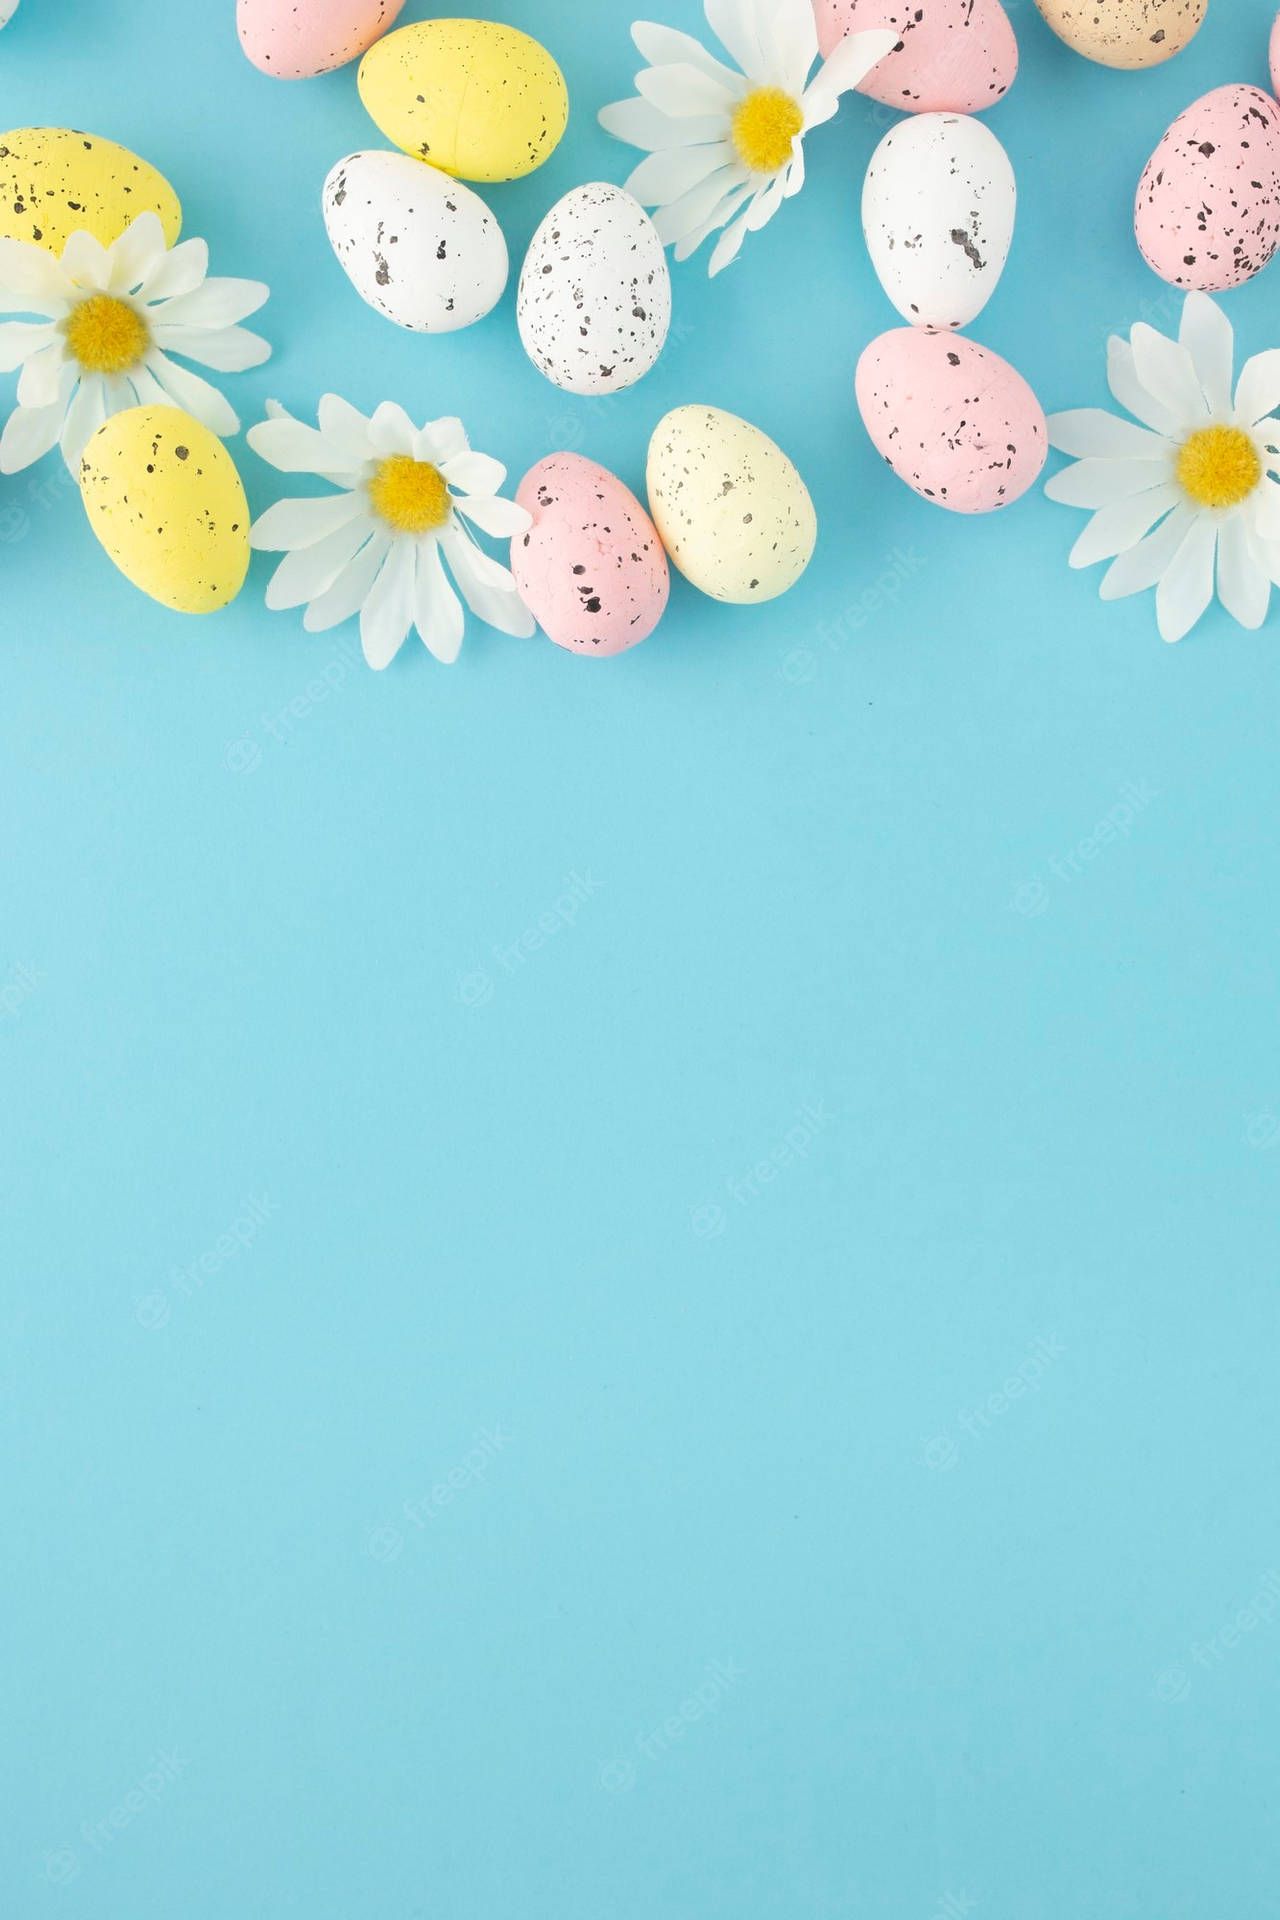 Download Colorful Easter Eggs On Blue Background Wallpaper